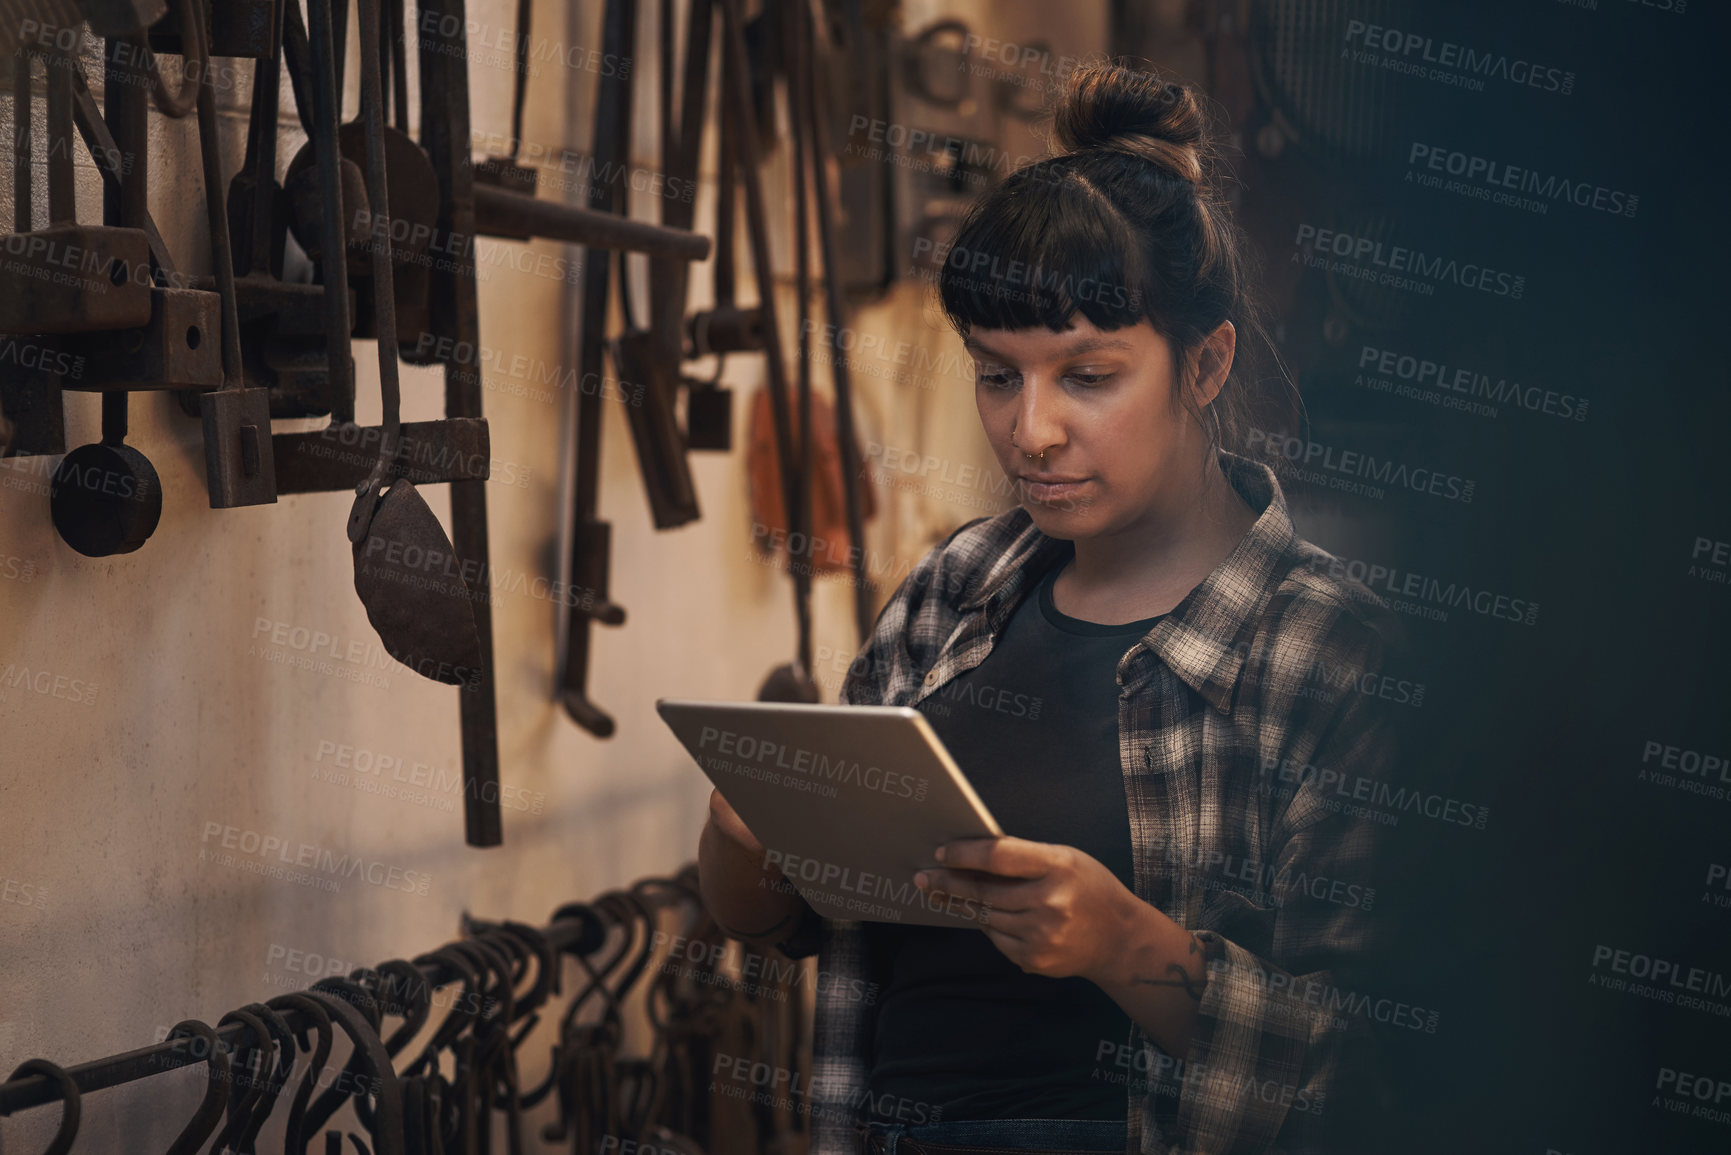 Buy stock photo Shot of a young woman using a digital tablet while working at a foundry